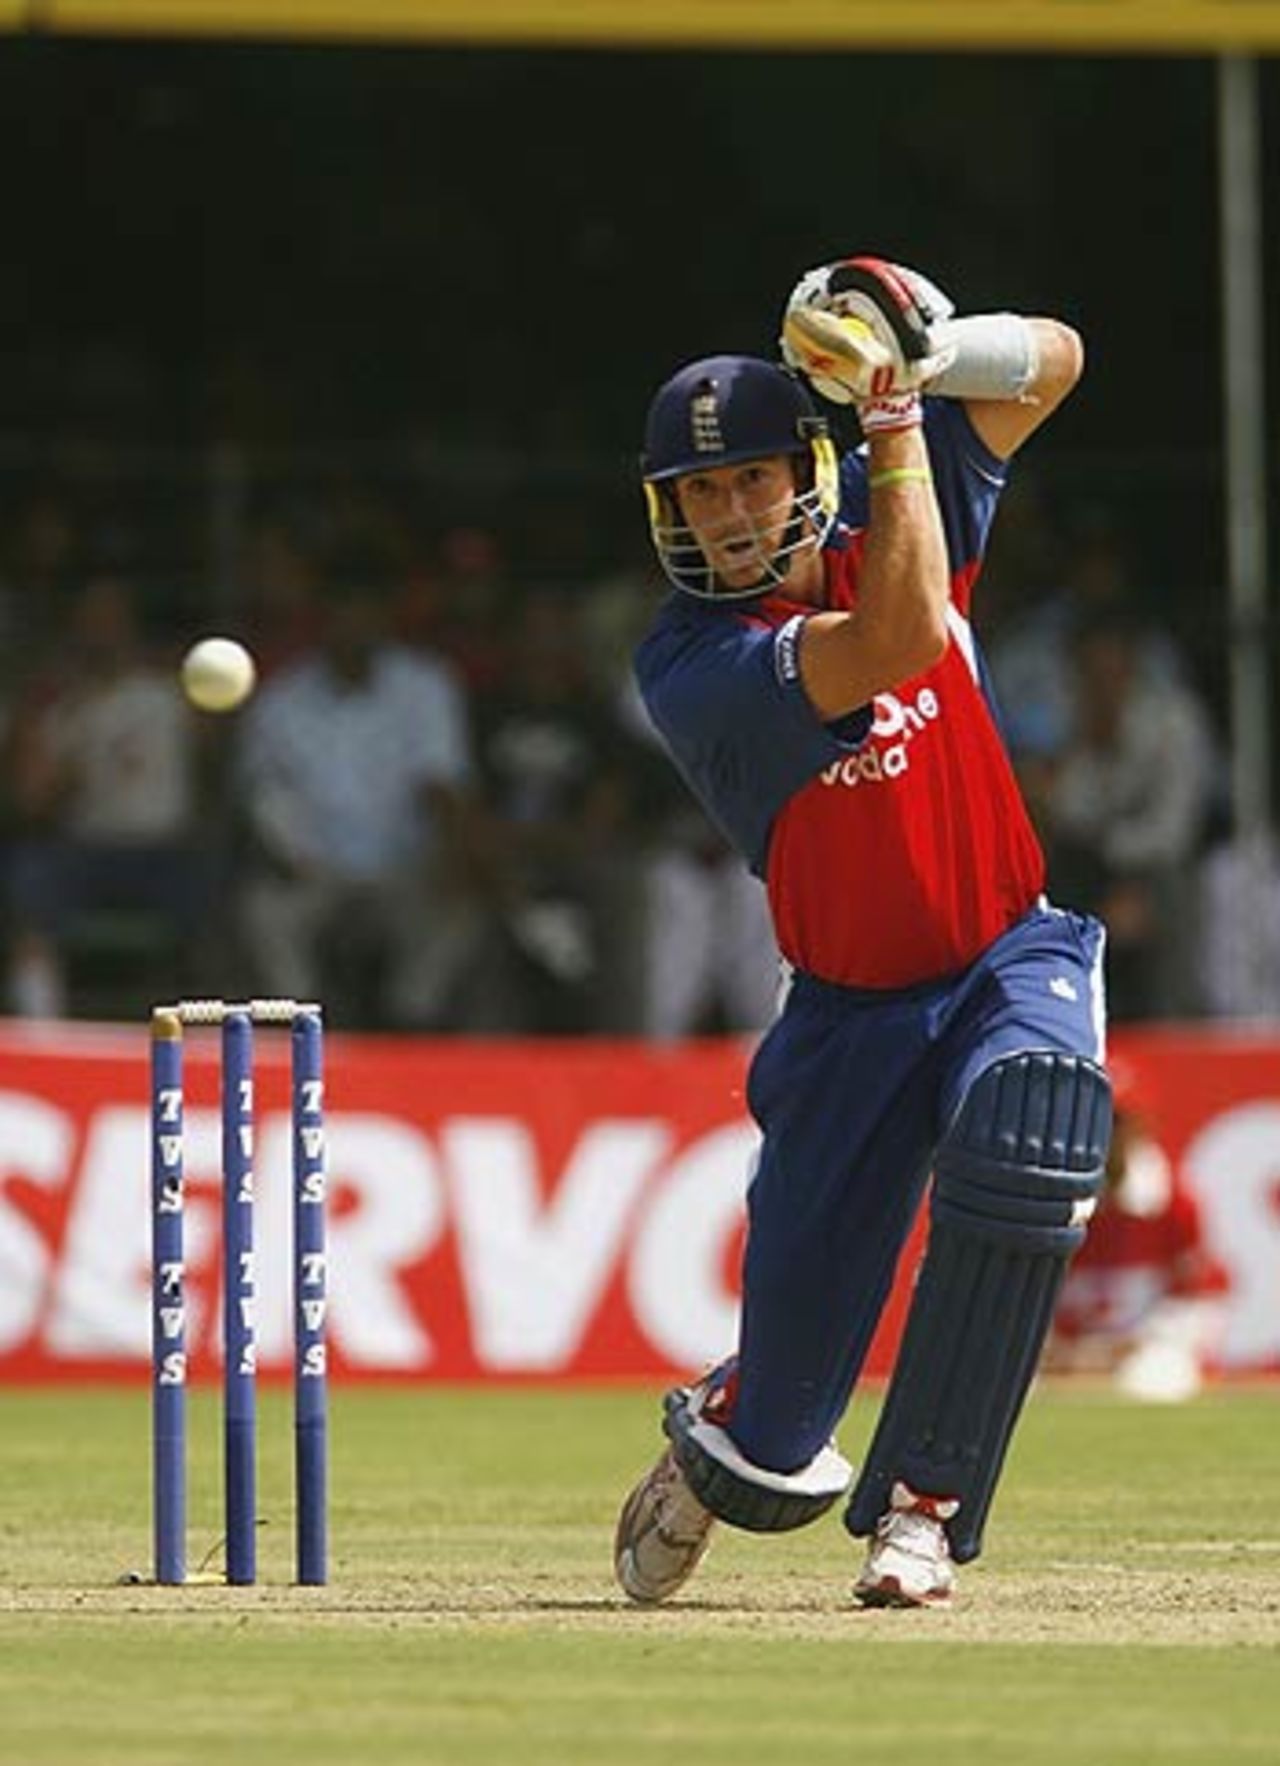 Kevin Pietersen drives through the covers for a boundary, India v England, 7th ODI, Indore, April 15 2006